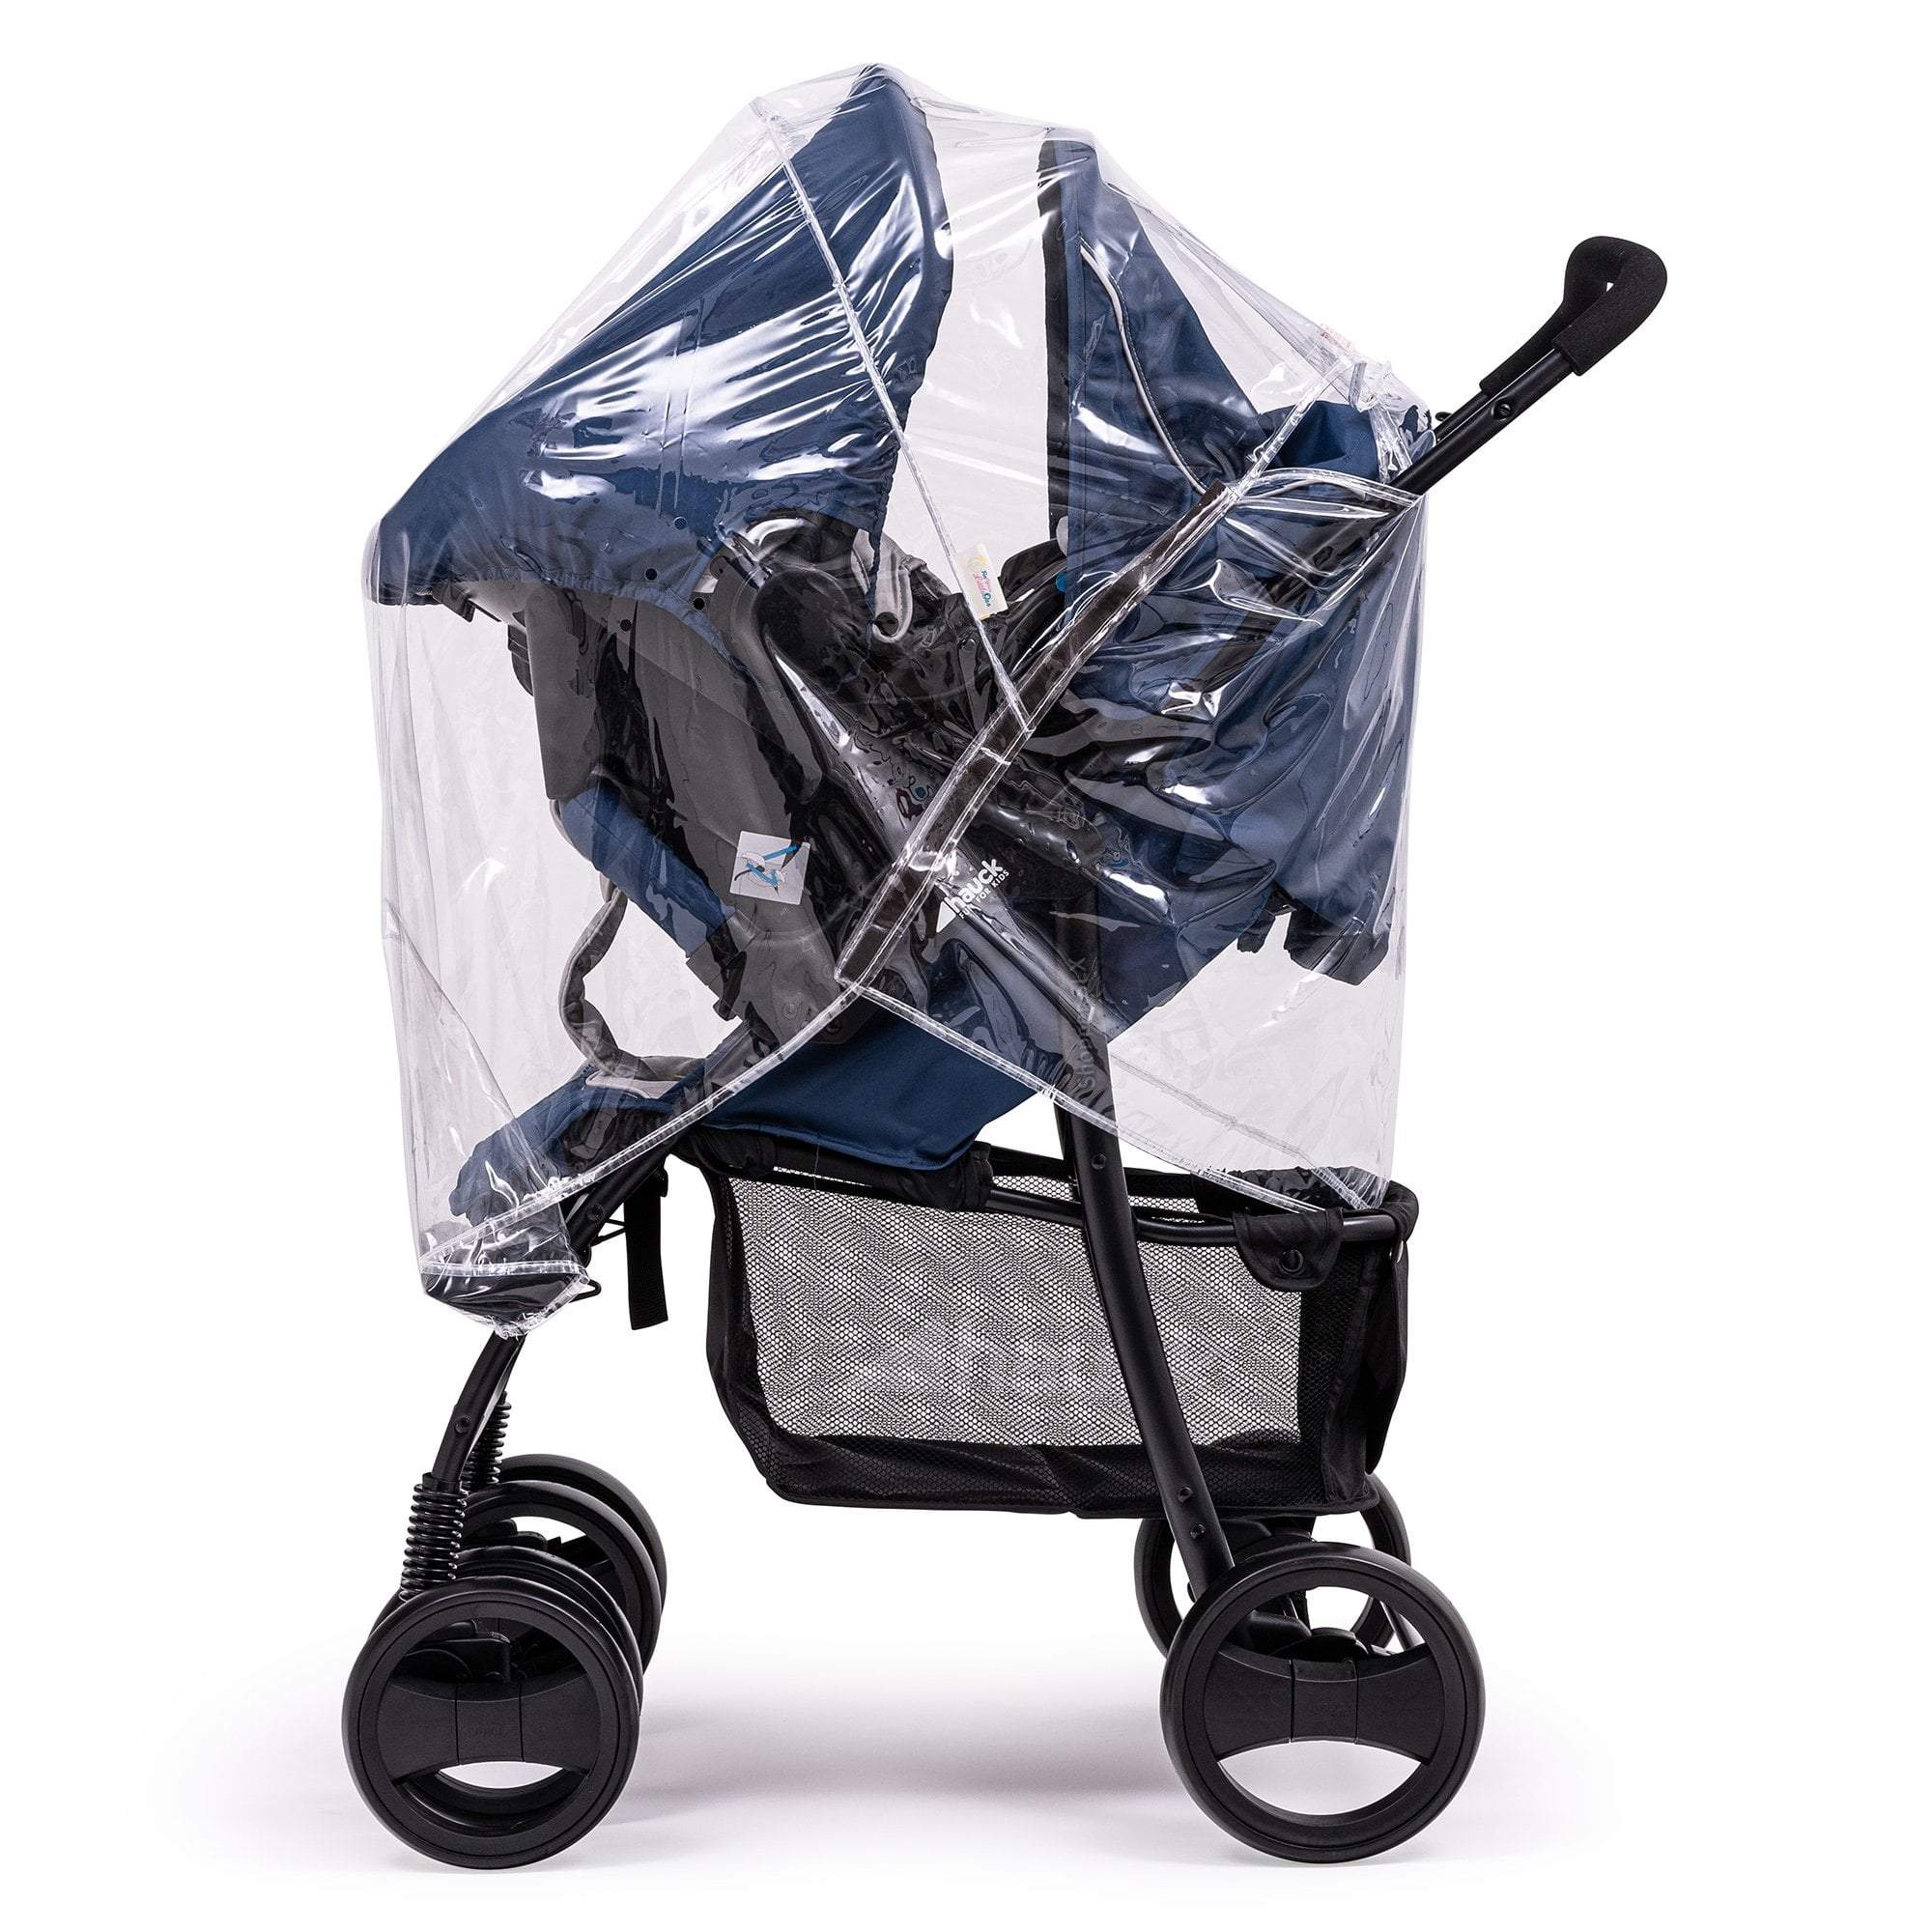 Travel System Raincover Compatible with Jane - Fits All Models - For Your Little One